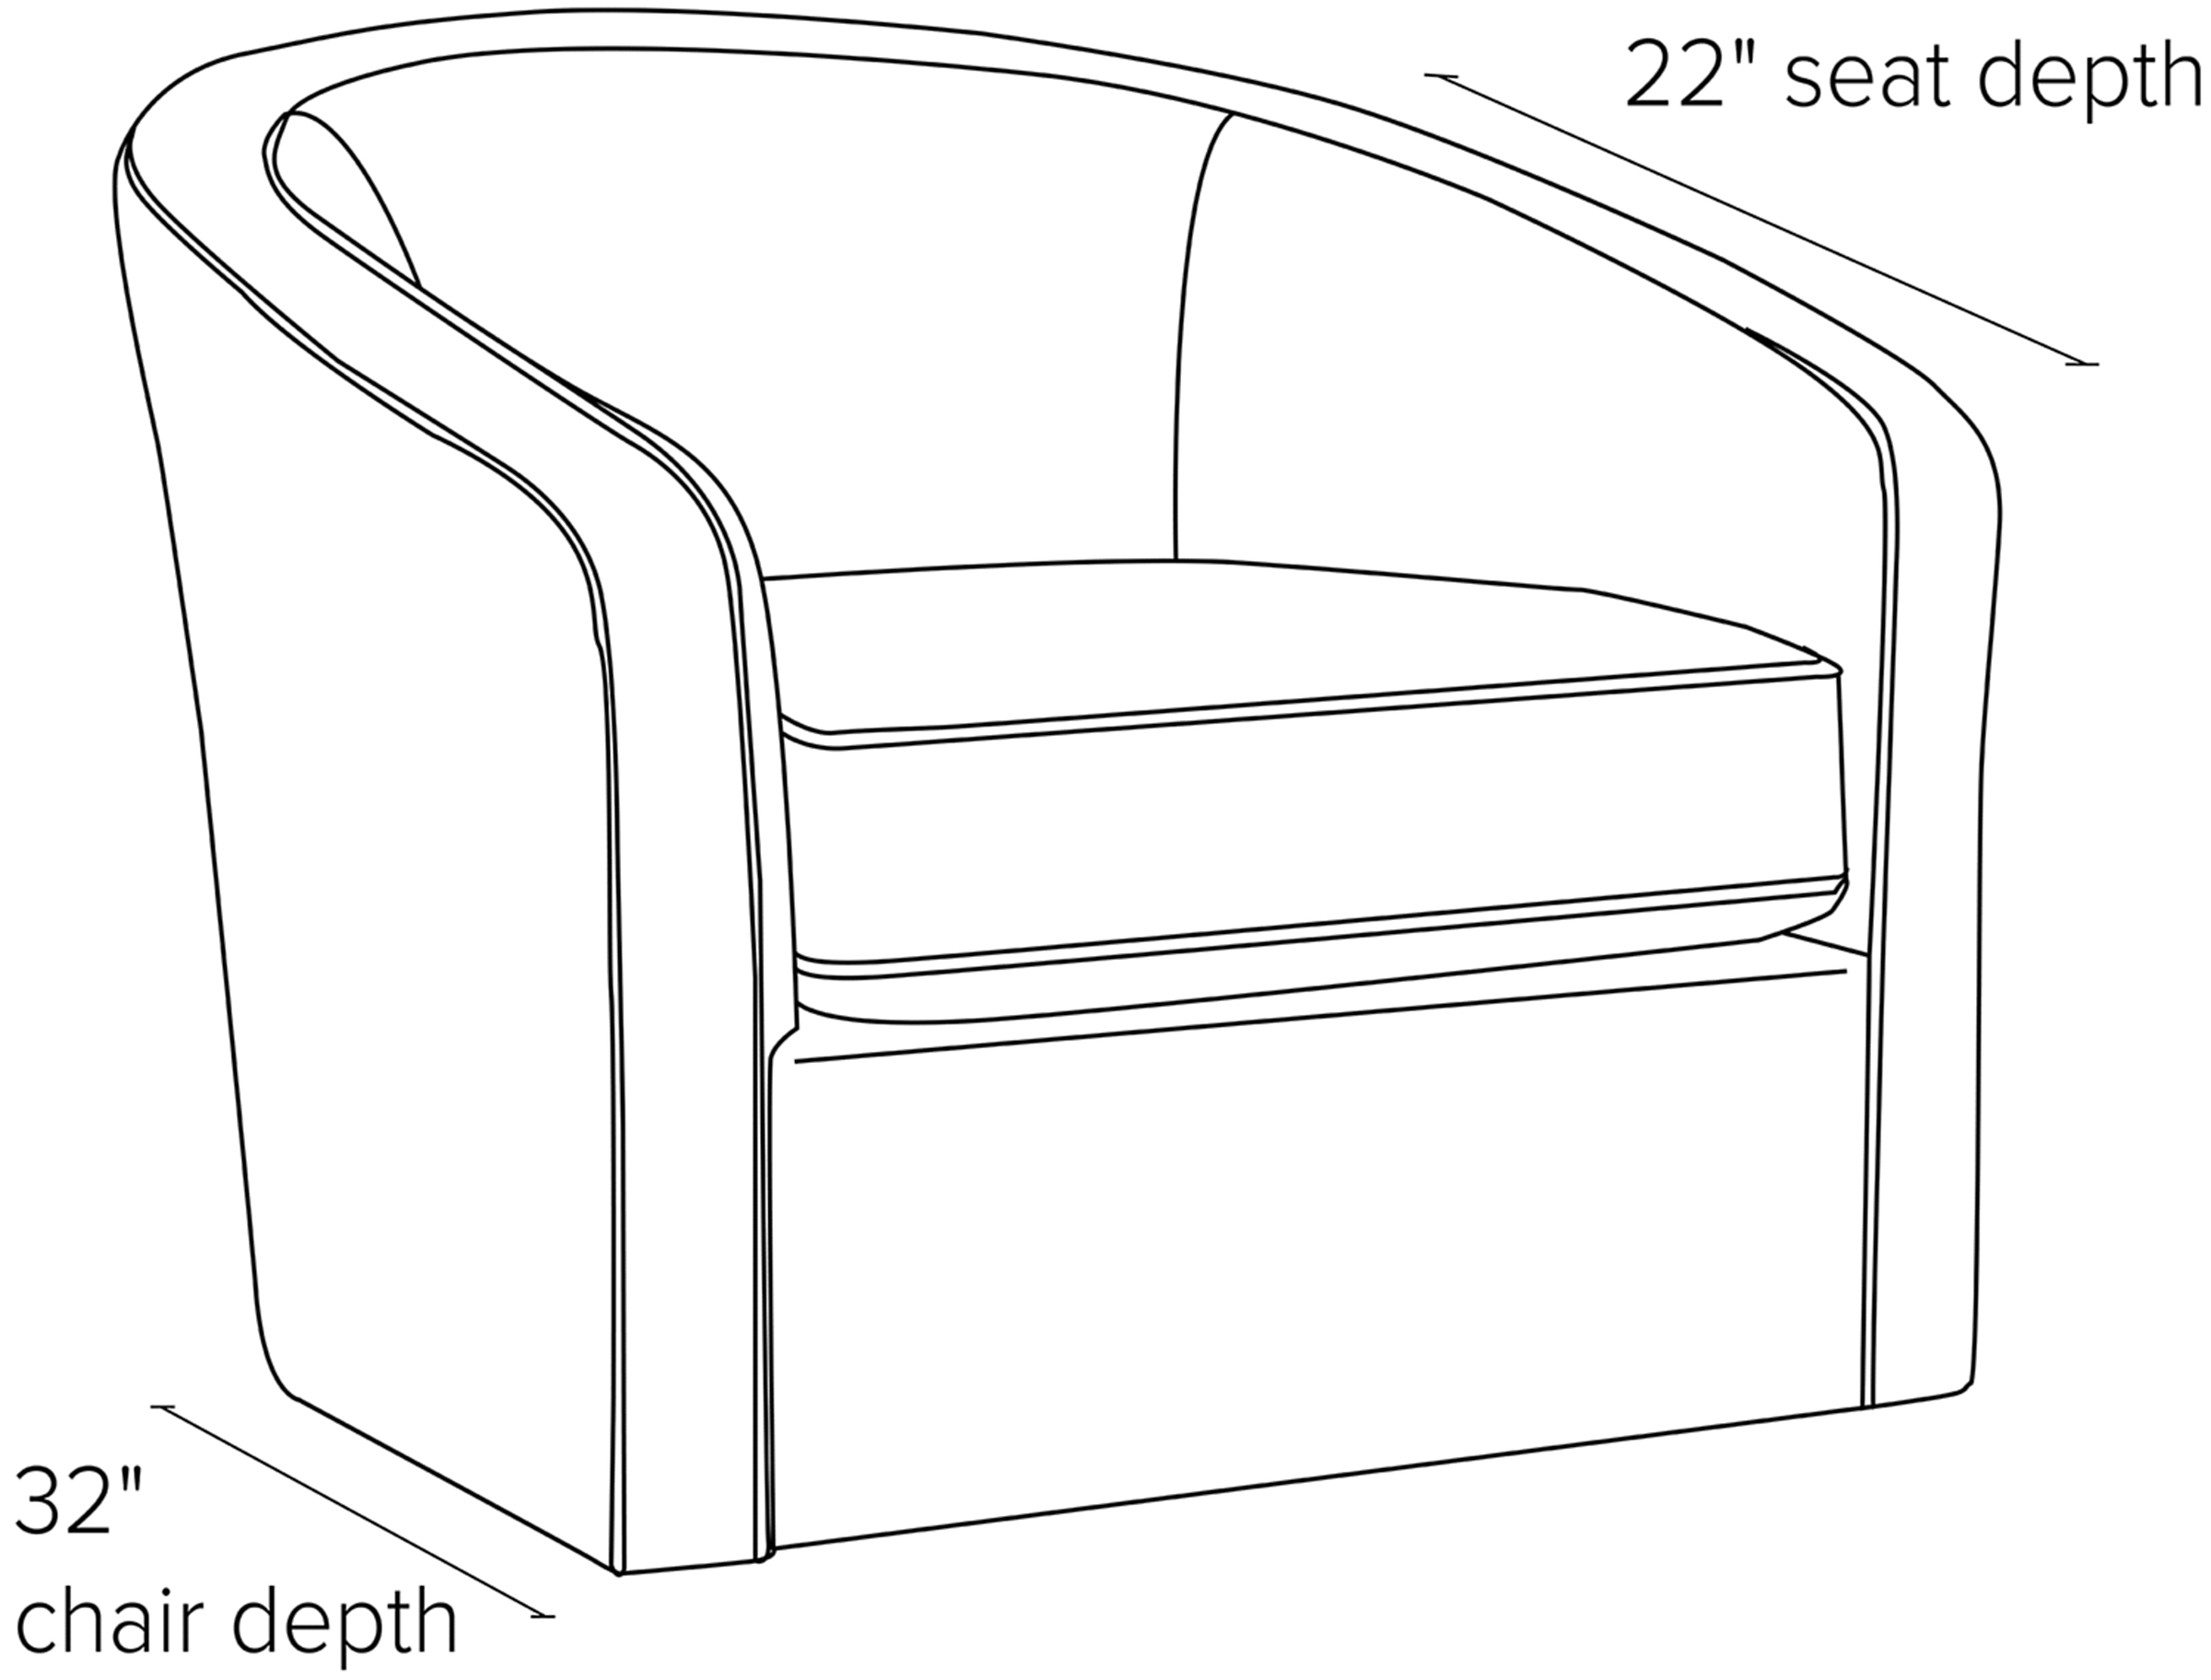 Side view dimension illustration of Amos chair.